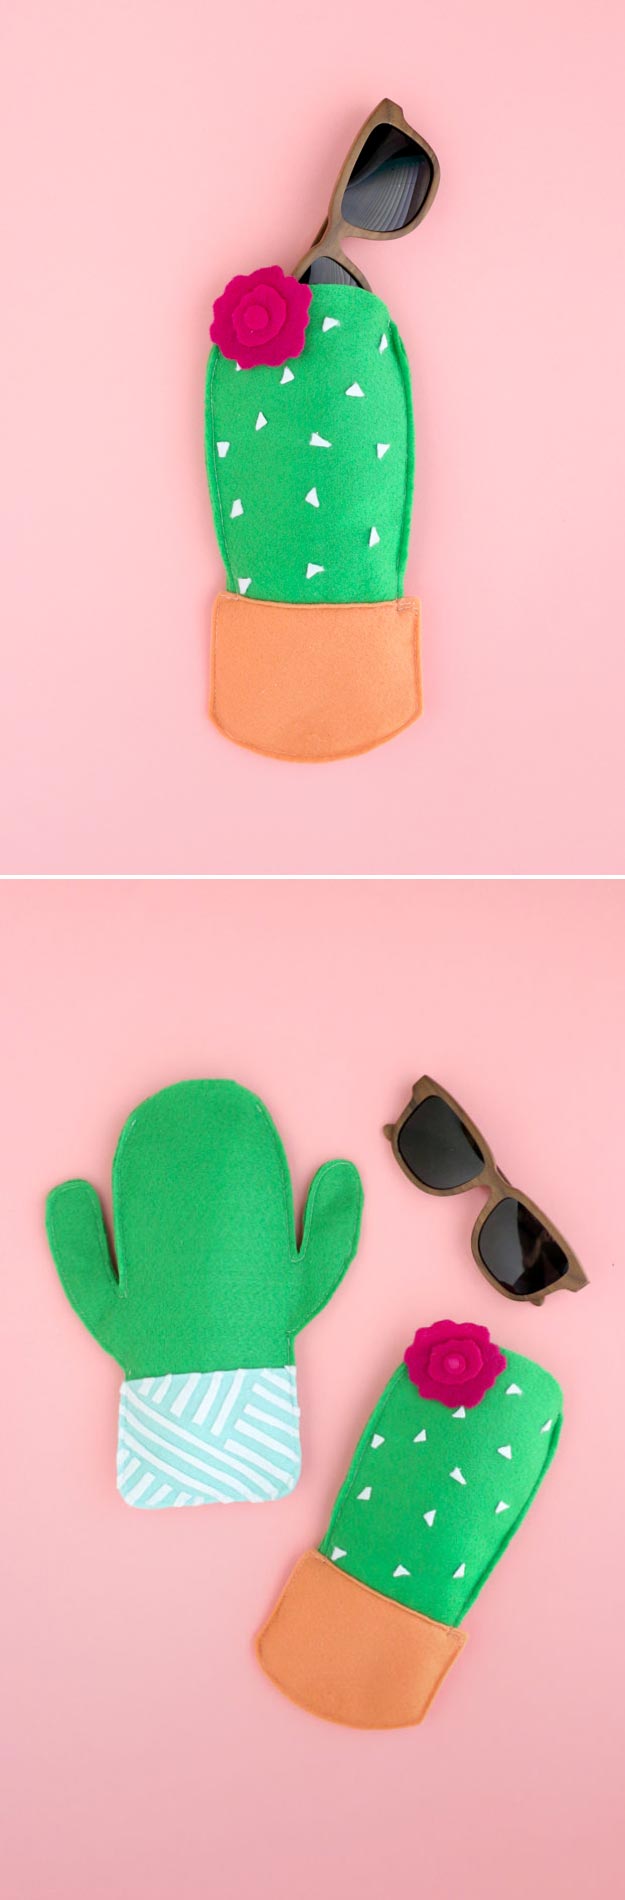 Easy Cactus Craft - DIY Felt Cactus Sunglasses Case - Homemade Cactus Party Idea - Cactus Craft for Room - Crafts to do With Kids - Cute and Easy Crafts - Quick Crafts to Make at Home #diycrafts #makeandsell #cactusdecor